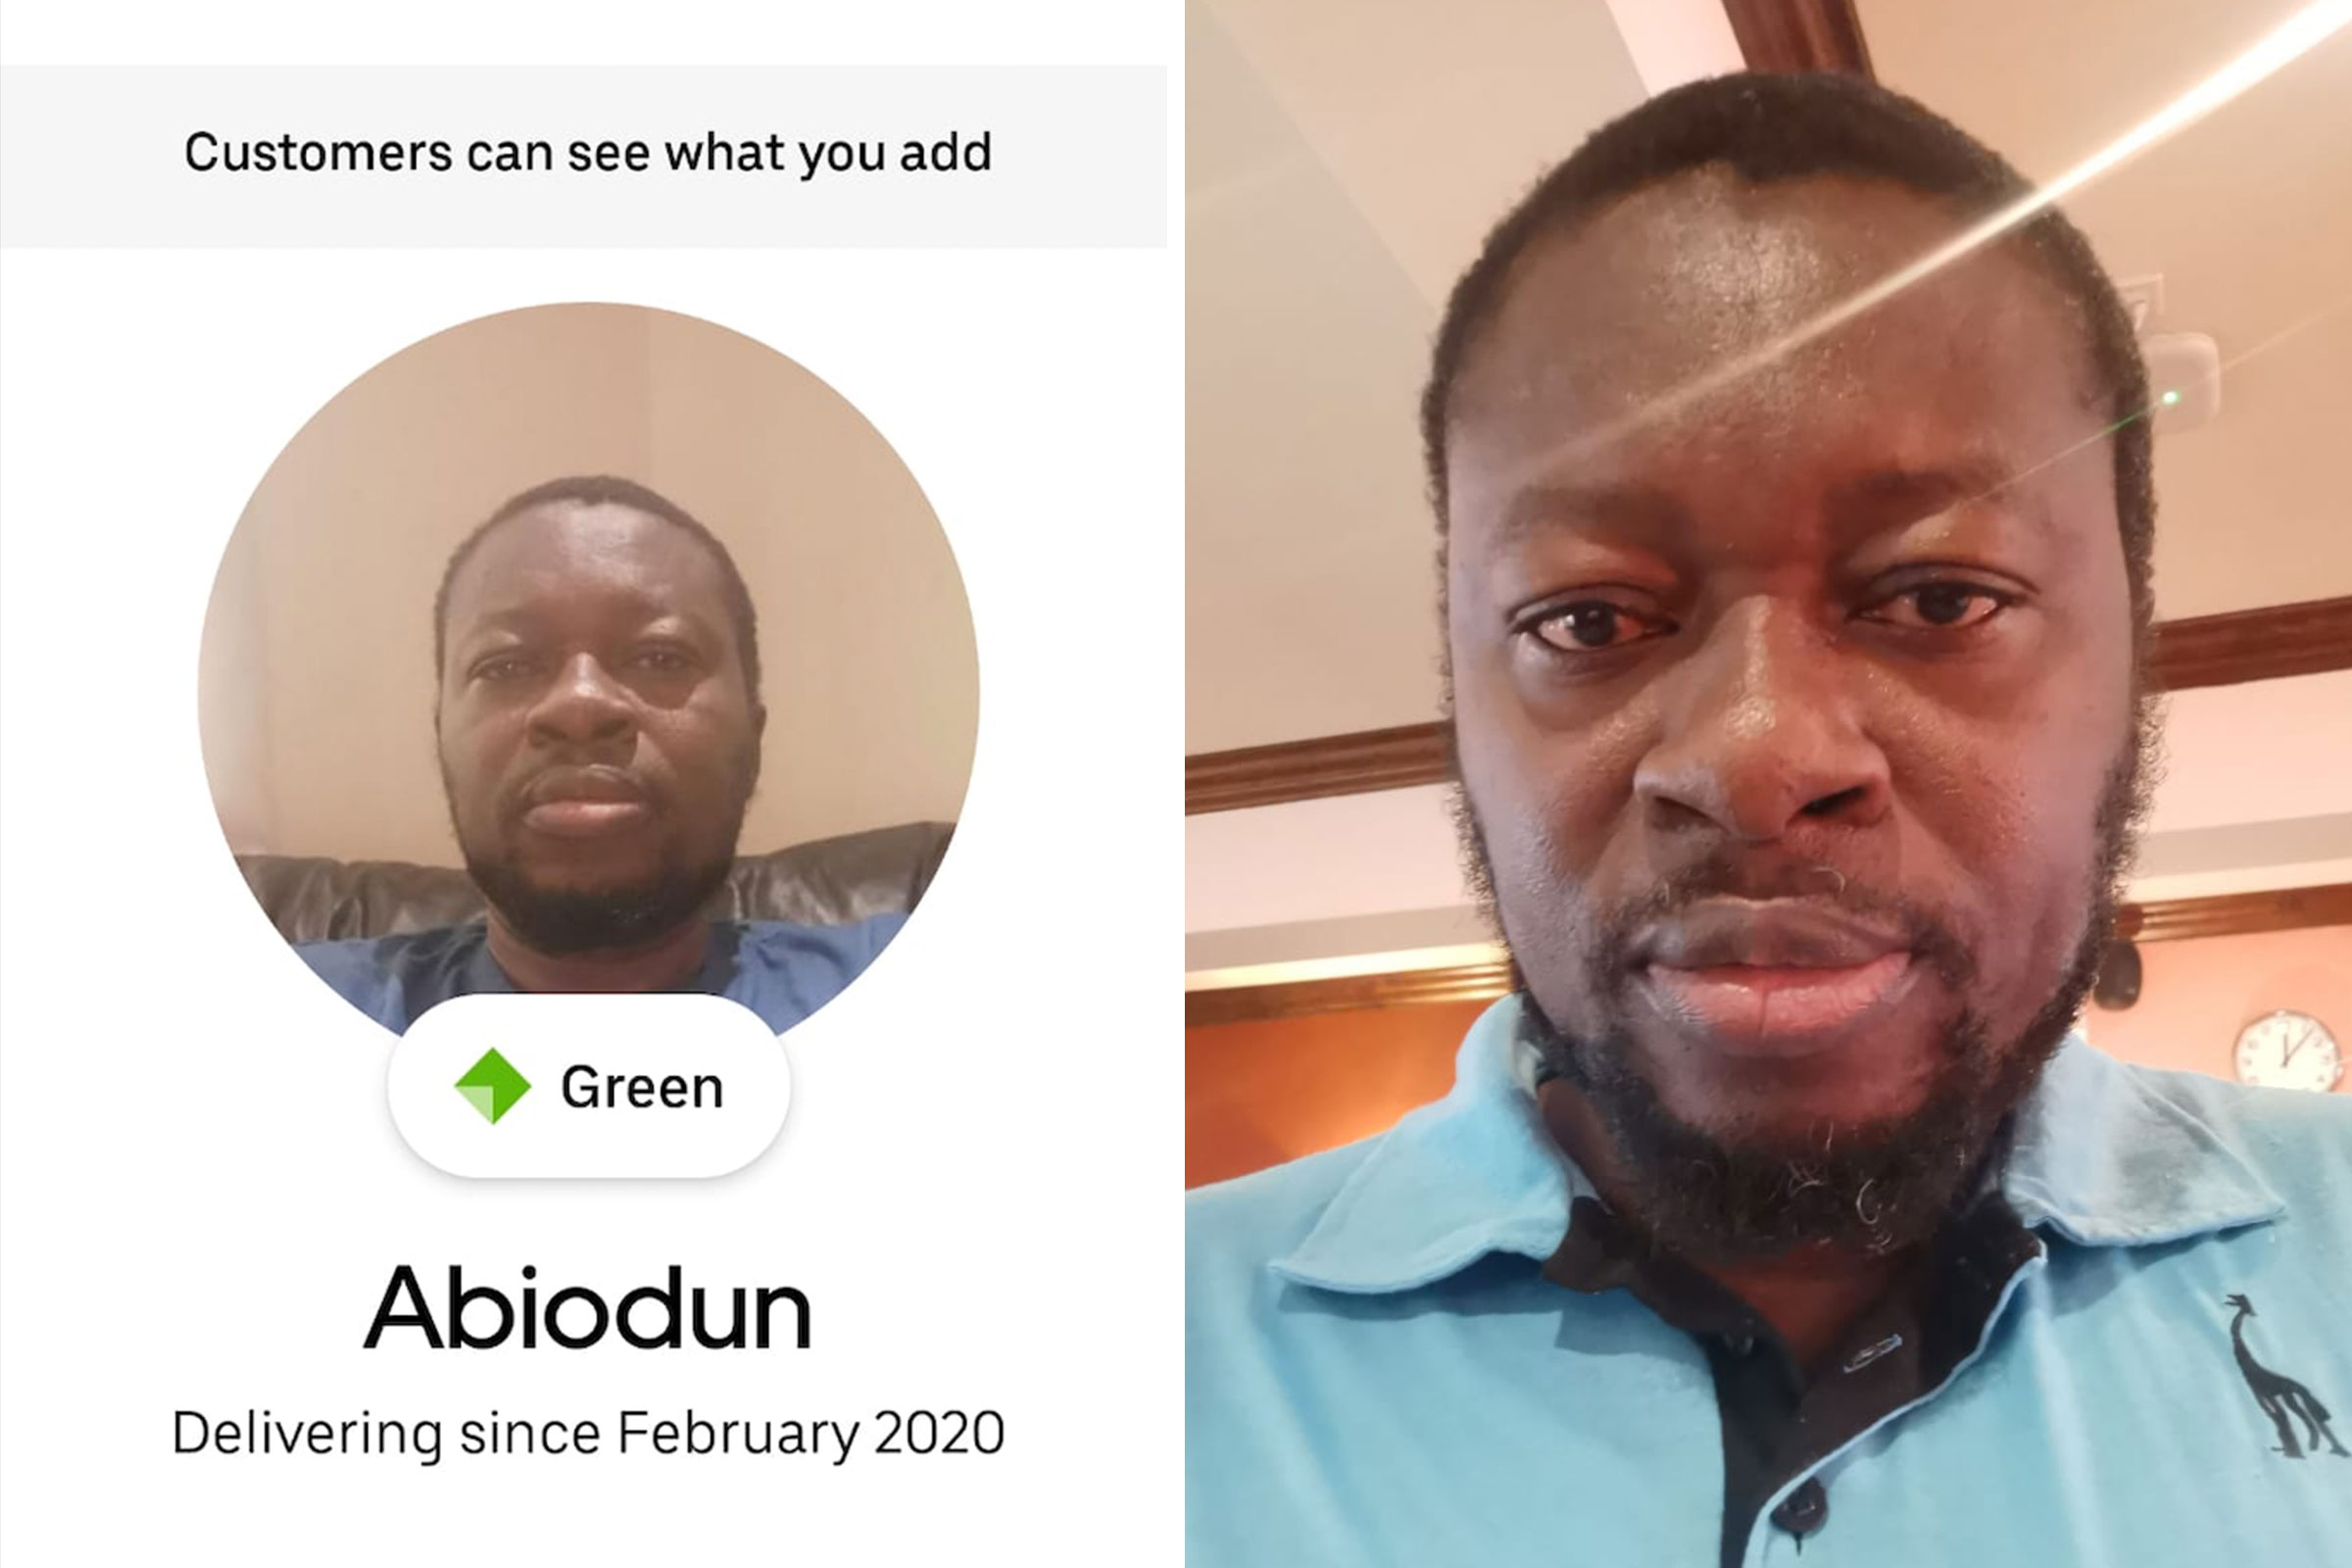 Uber Eats delivery driver Abiodun Ogunyemi says his account was suspended after Uber's facial recognition software failed to verify his photo. (Courtesy)